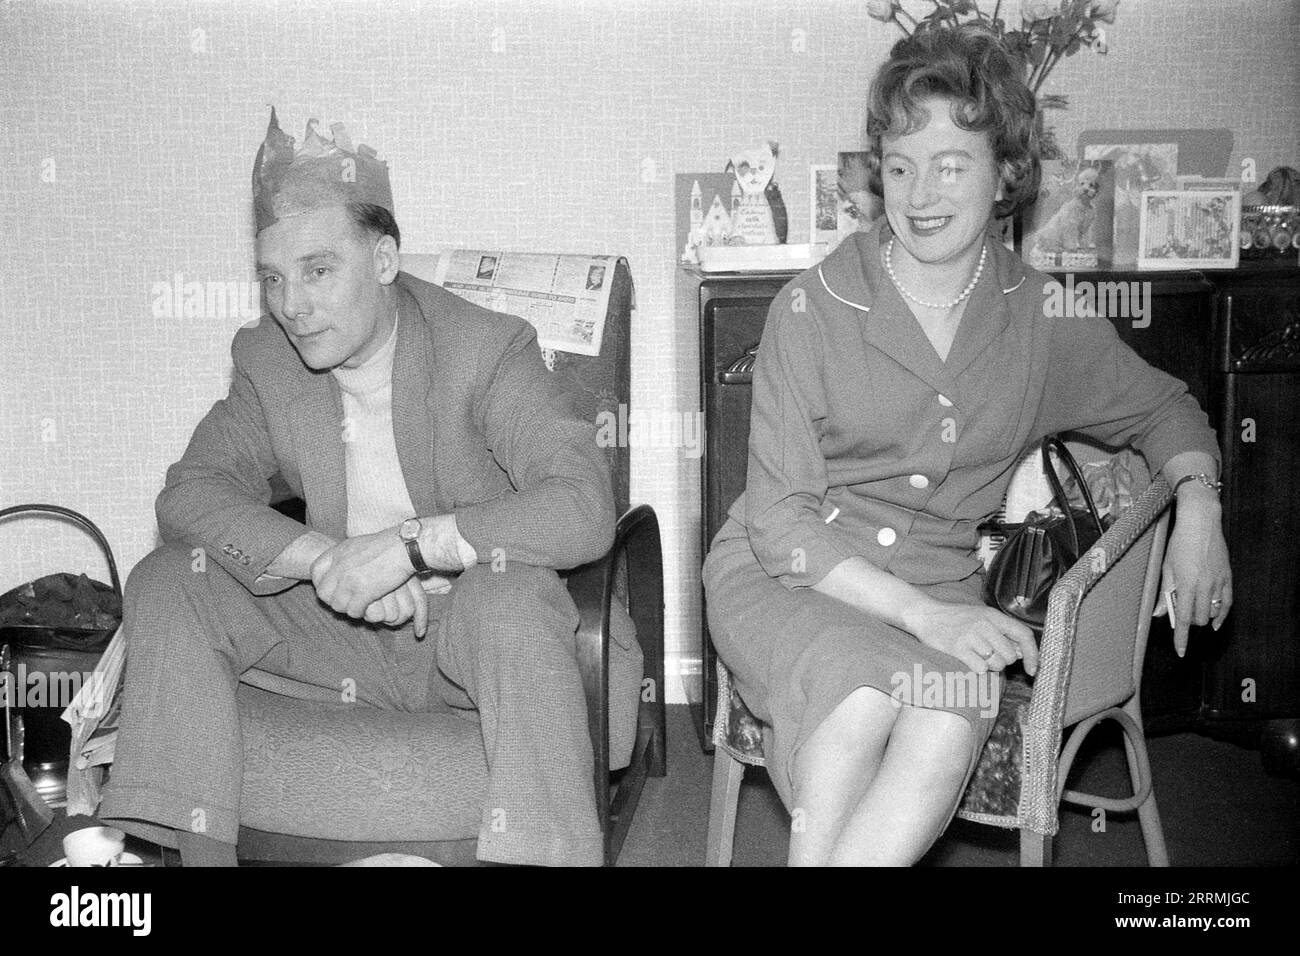 England. c.1960 – A man and a woman are sitting in a lounge watching television on Christmas Day. The man is wearing a tweed suit with a sweater and a tissue paper hat from a Christmas cracker. He is sitting in an armchair with a newspaper draped over the back. The woman is wearing a two-piece suit and a string of pearls and is sitting in a Lloyd Loom type chair. Behind them is a dark wood sideboard cabinet with greetings cards displayed on top. To the side is a full brass coal scuttle and fire irons. Stock Photo